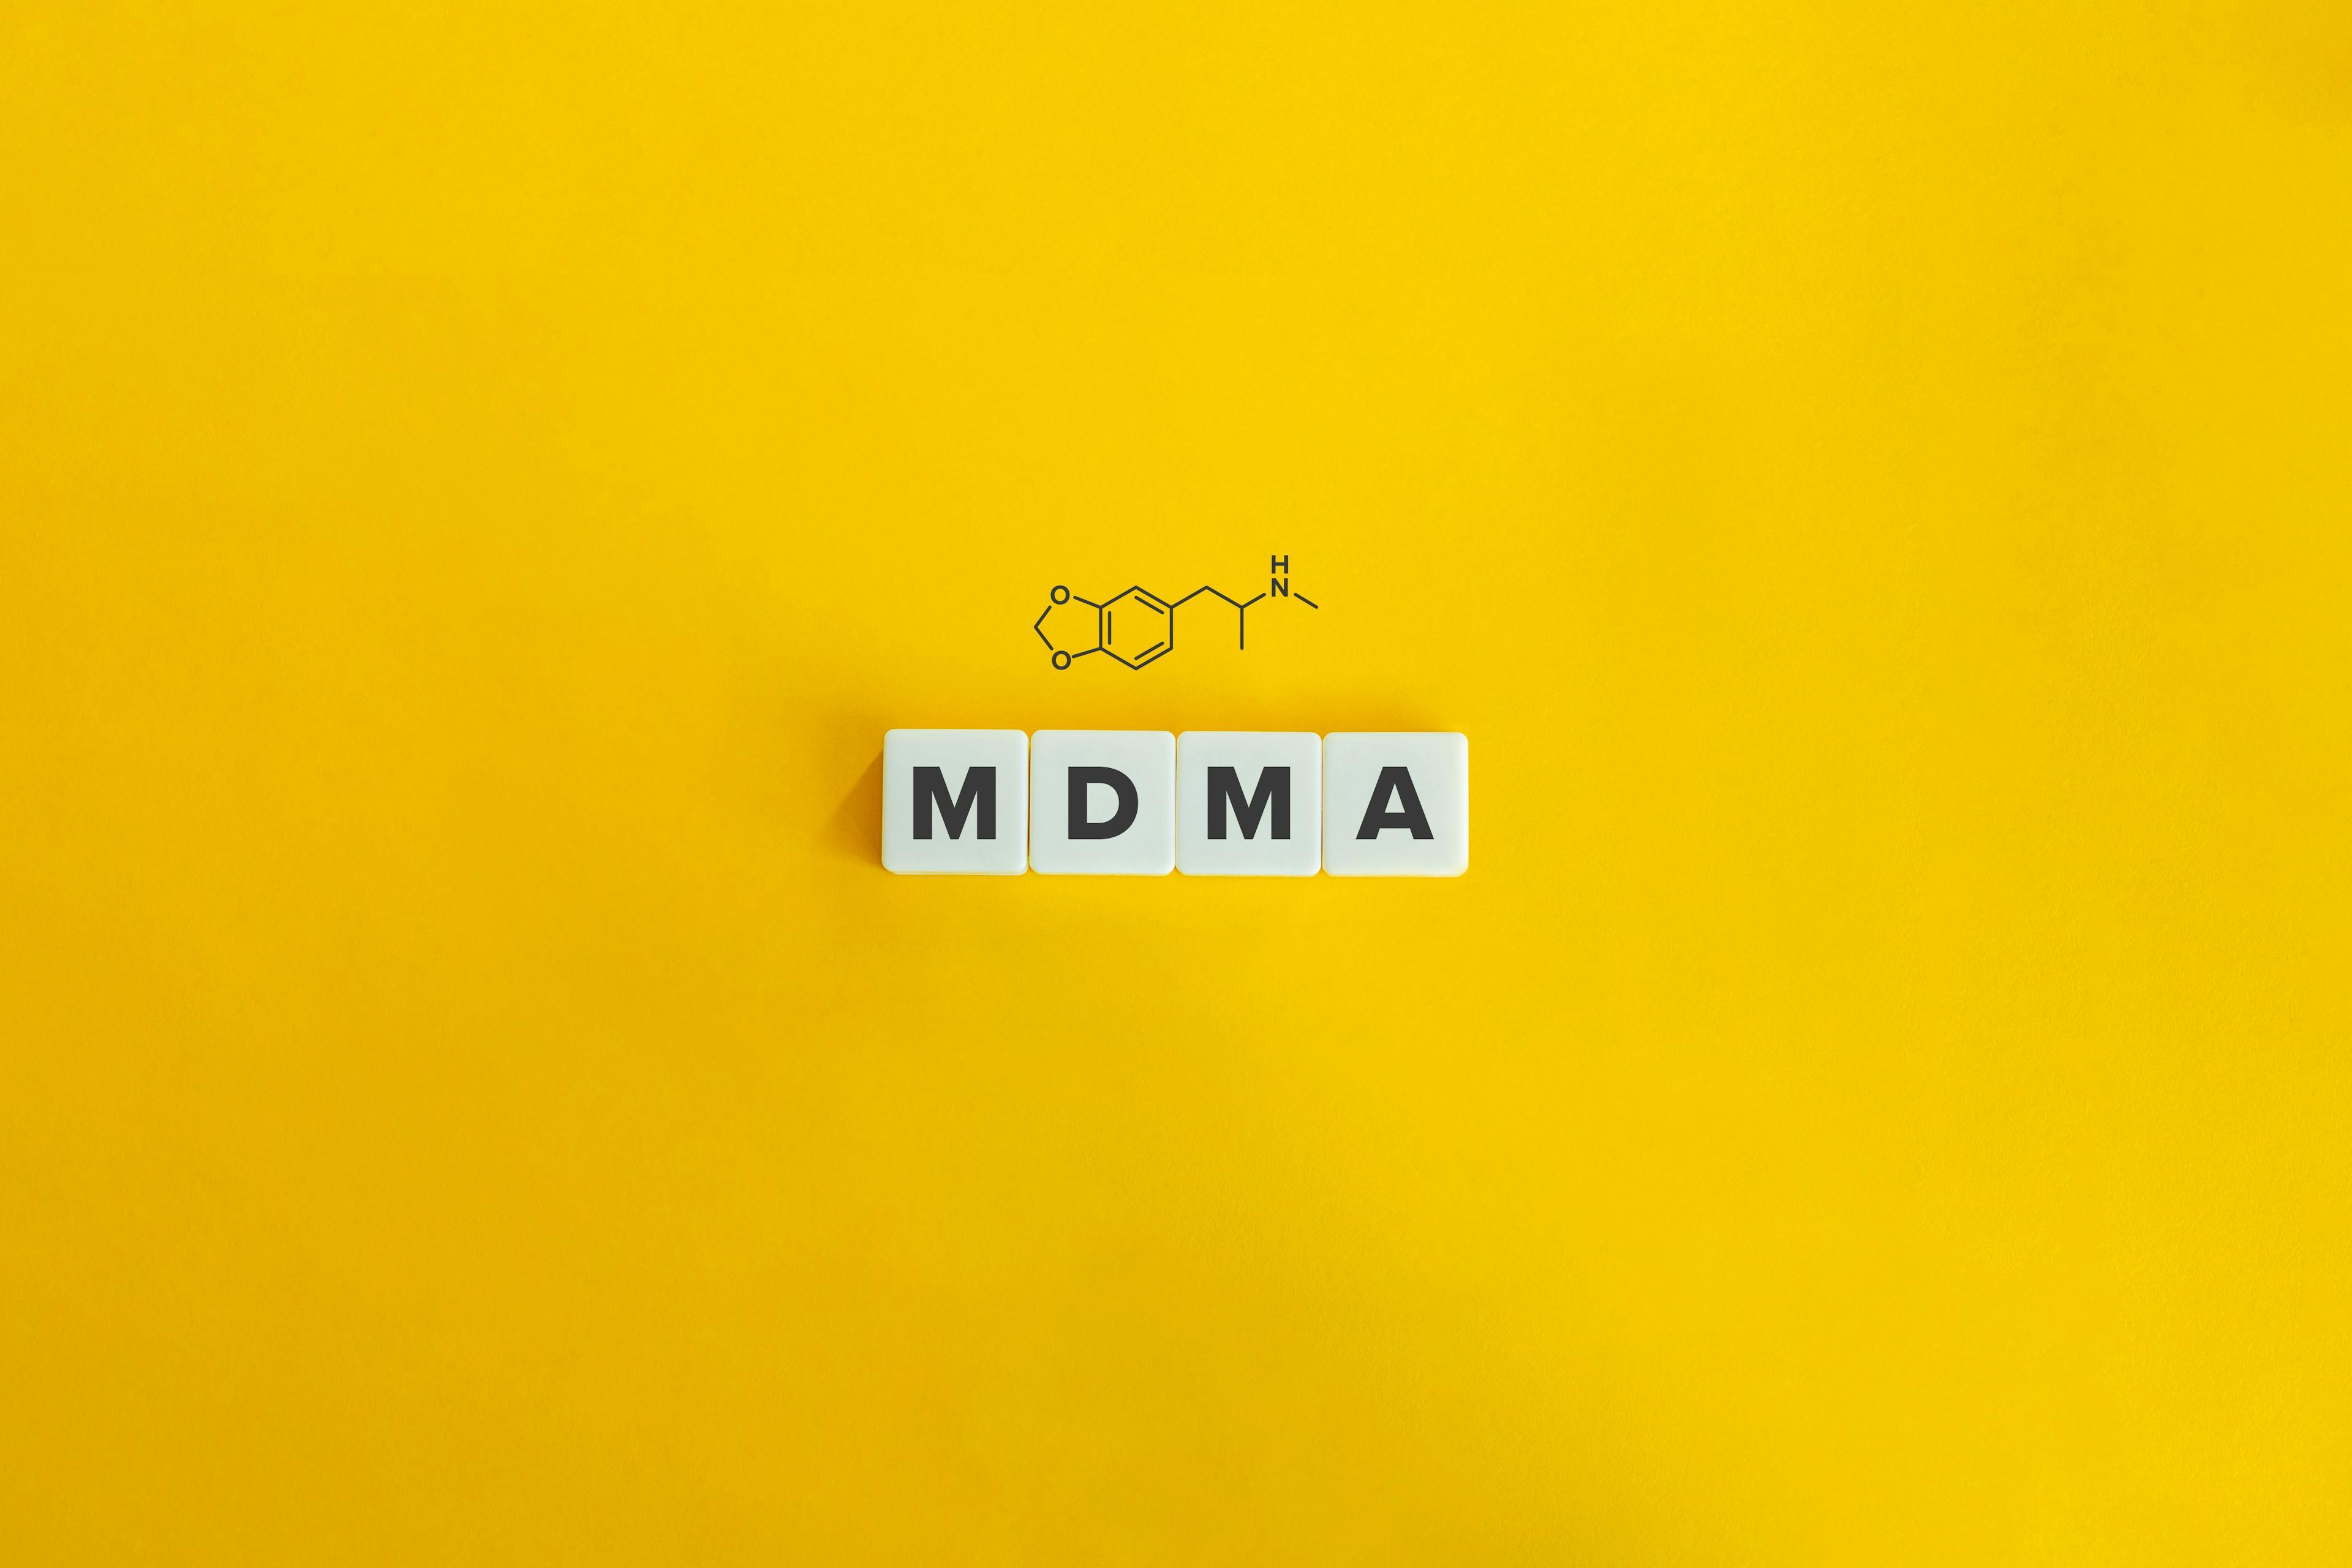 What Can be Learned From the FDA Advisory Panel’s Meeting on MDMA?